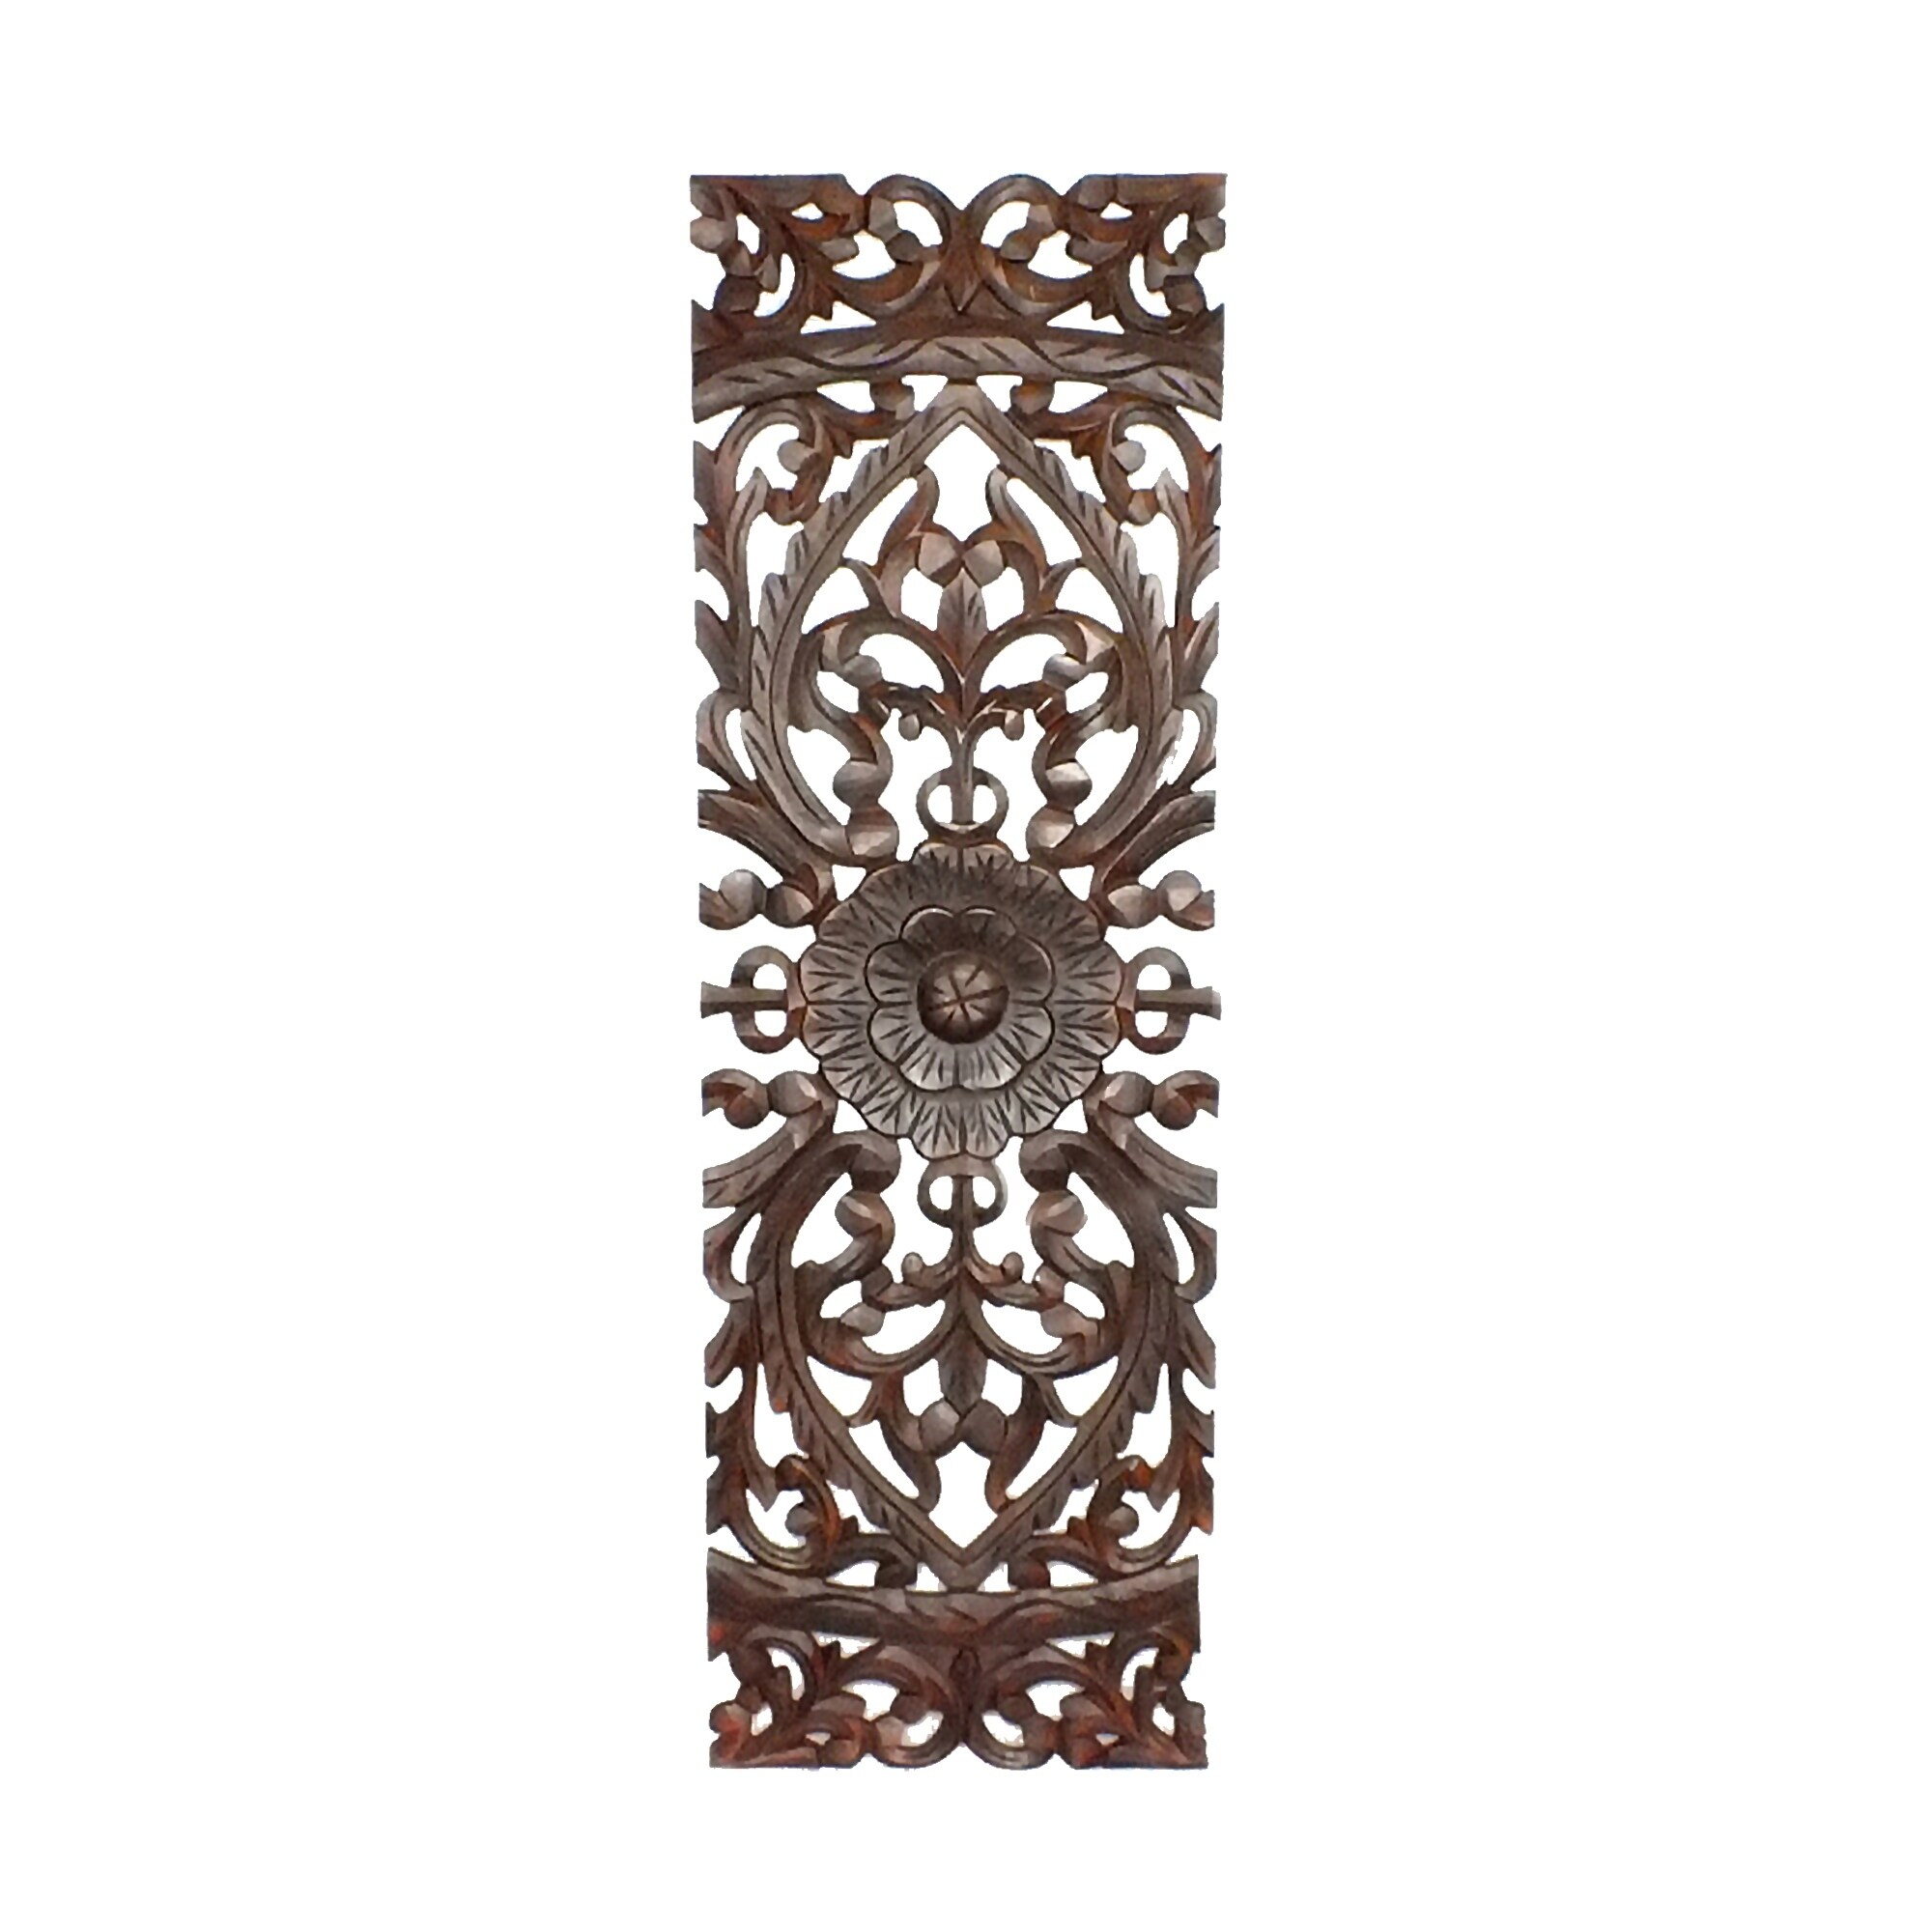 Three Piece Wooden Wall Panel Set with Traditional Scrollwork and Floral  Details, Brown